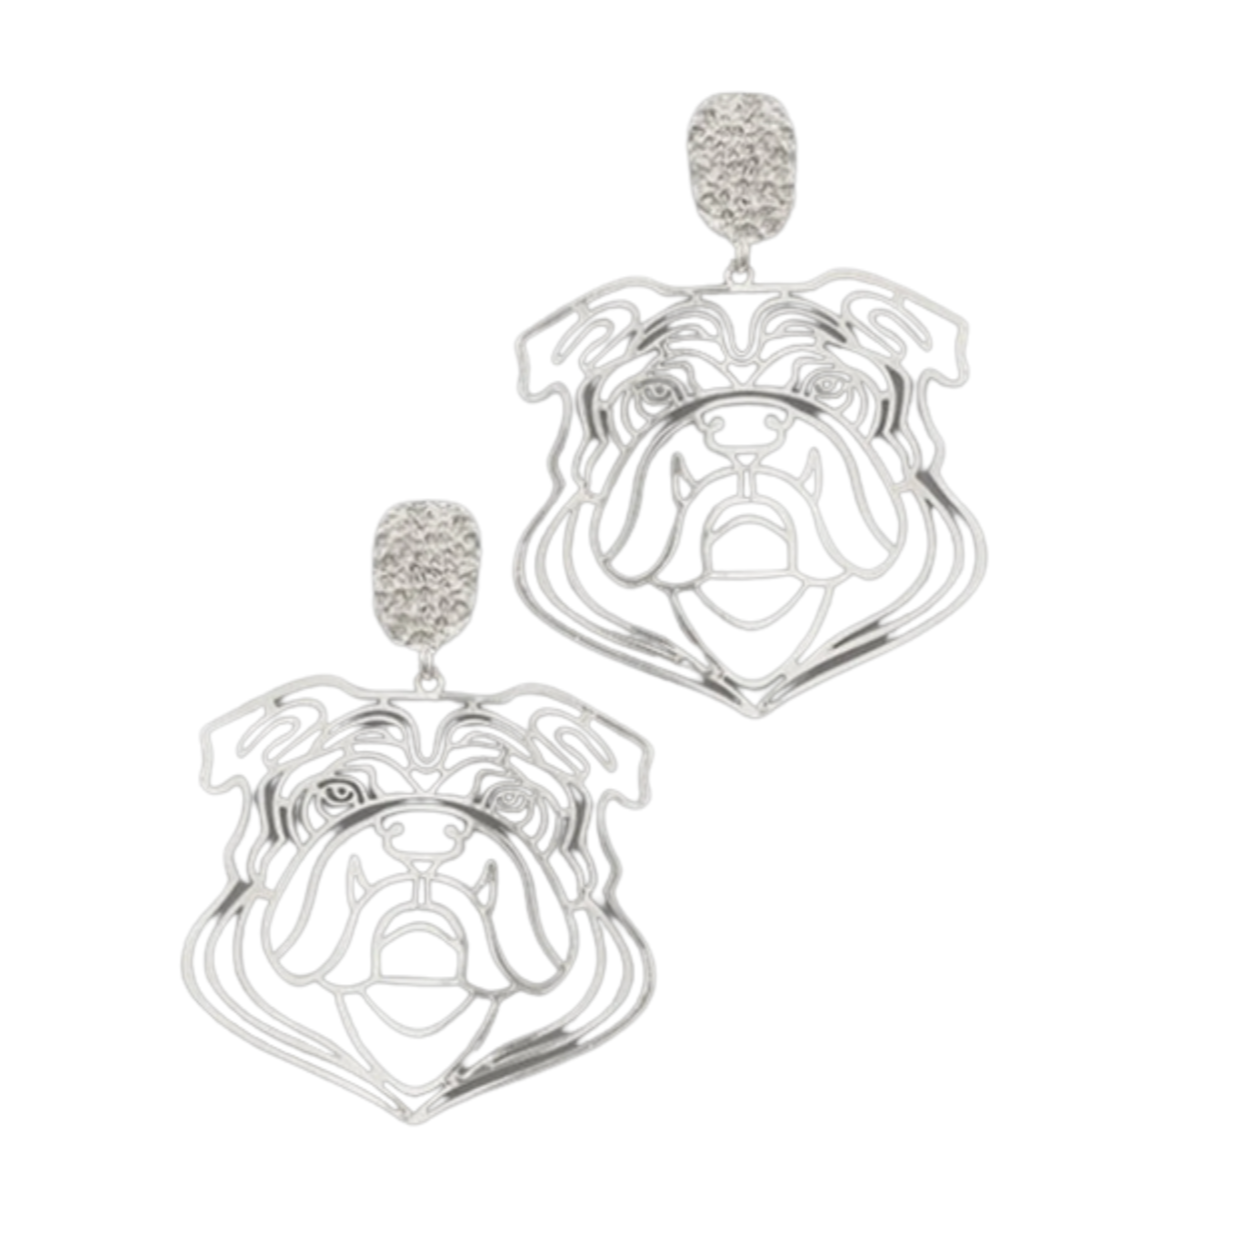 UGA Bulldog Earrings by The Clubhouse Athens: Show Your Bulldog Pride!